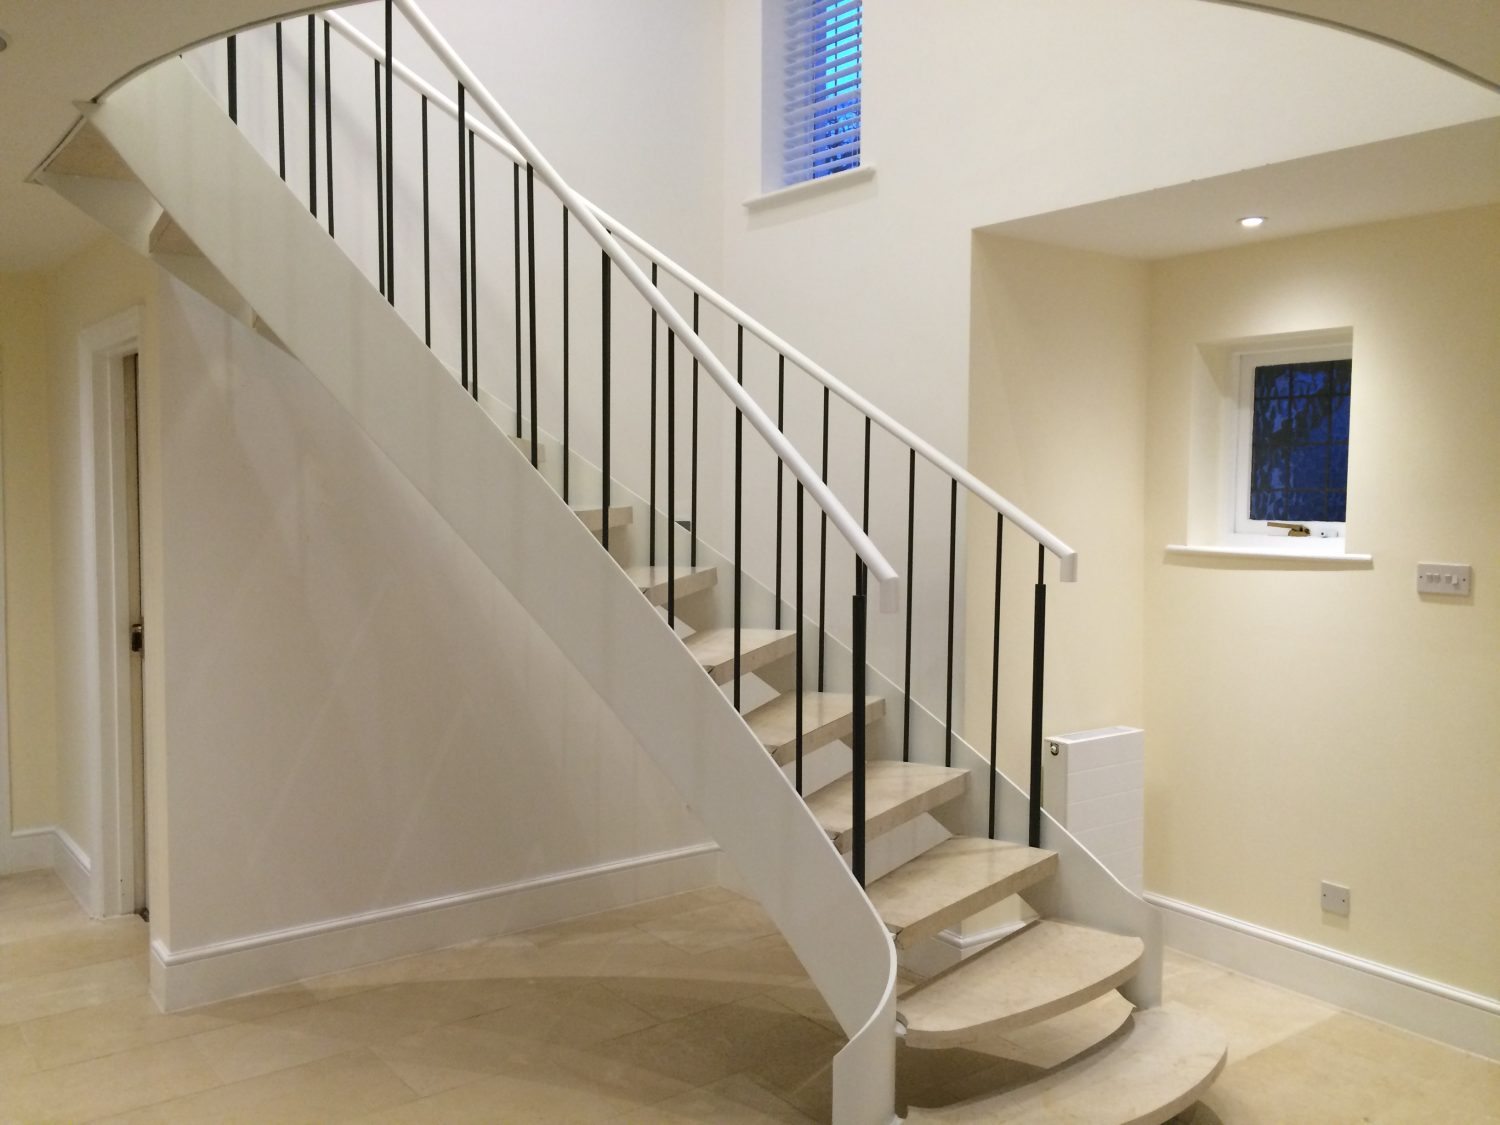 Handrail Curves on Both Sides of Staircase